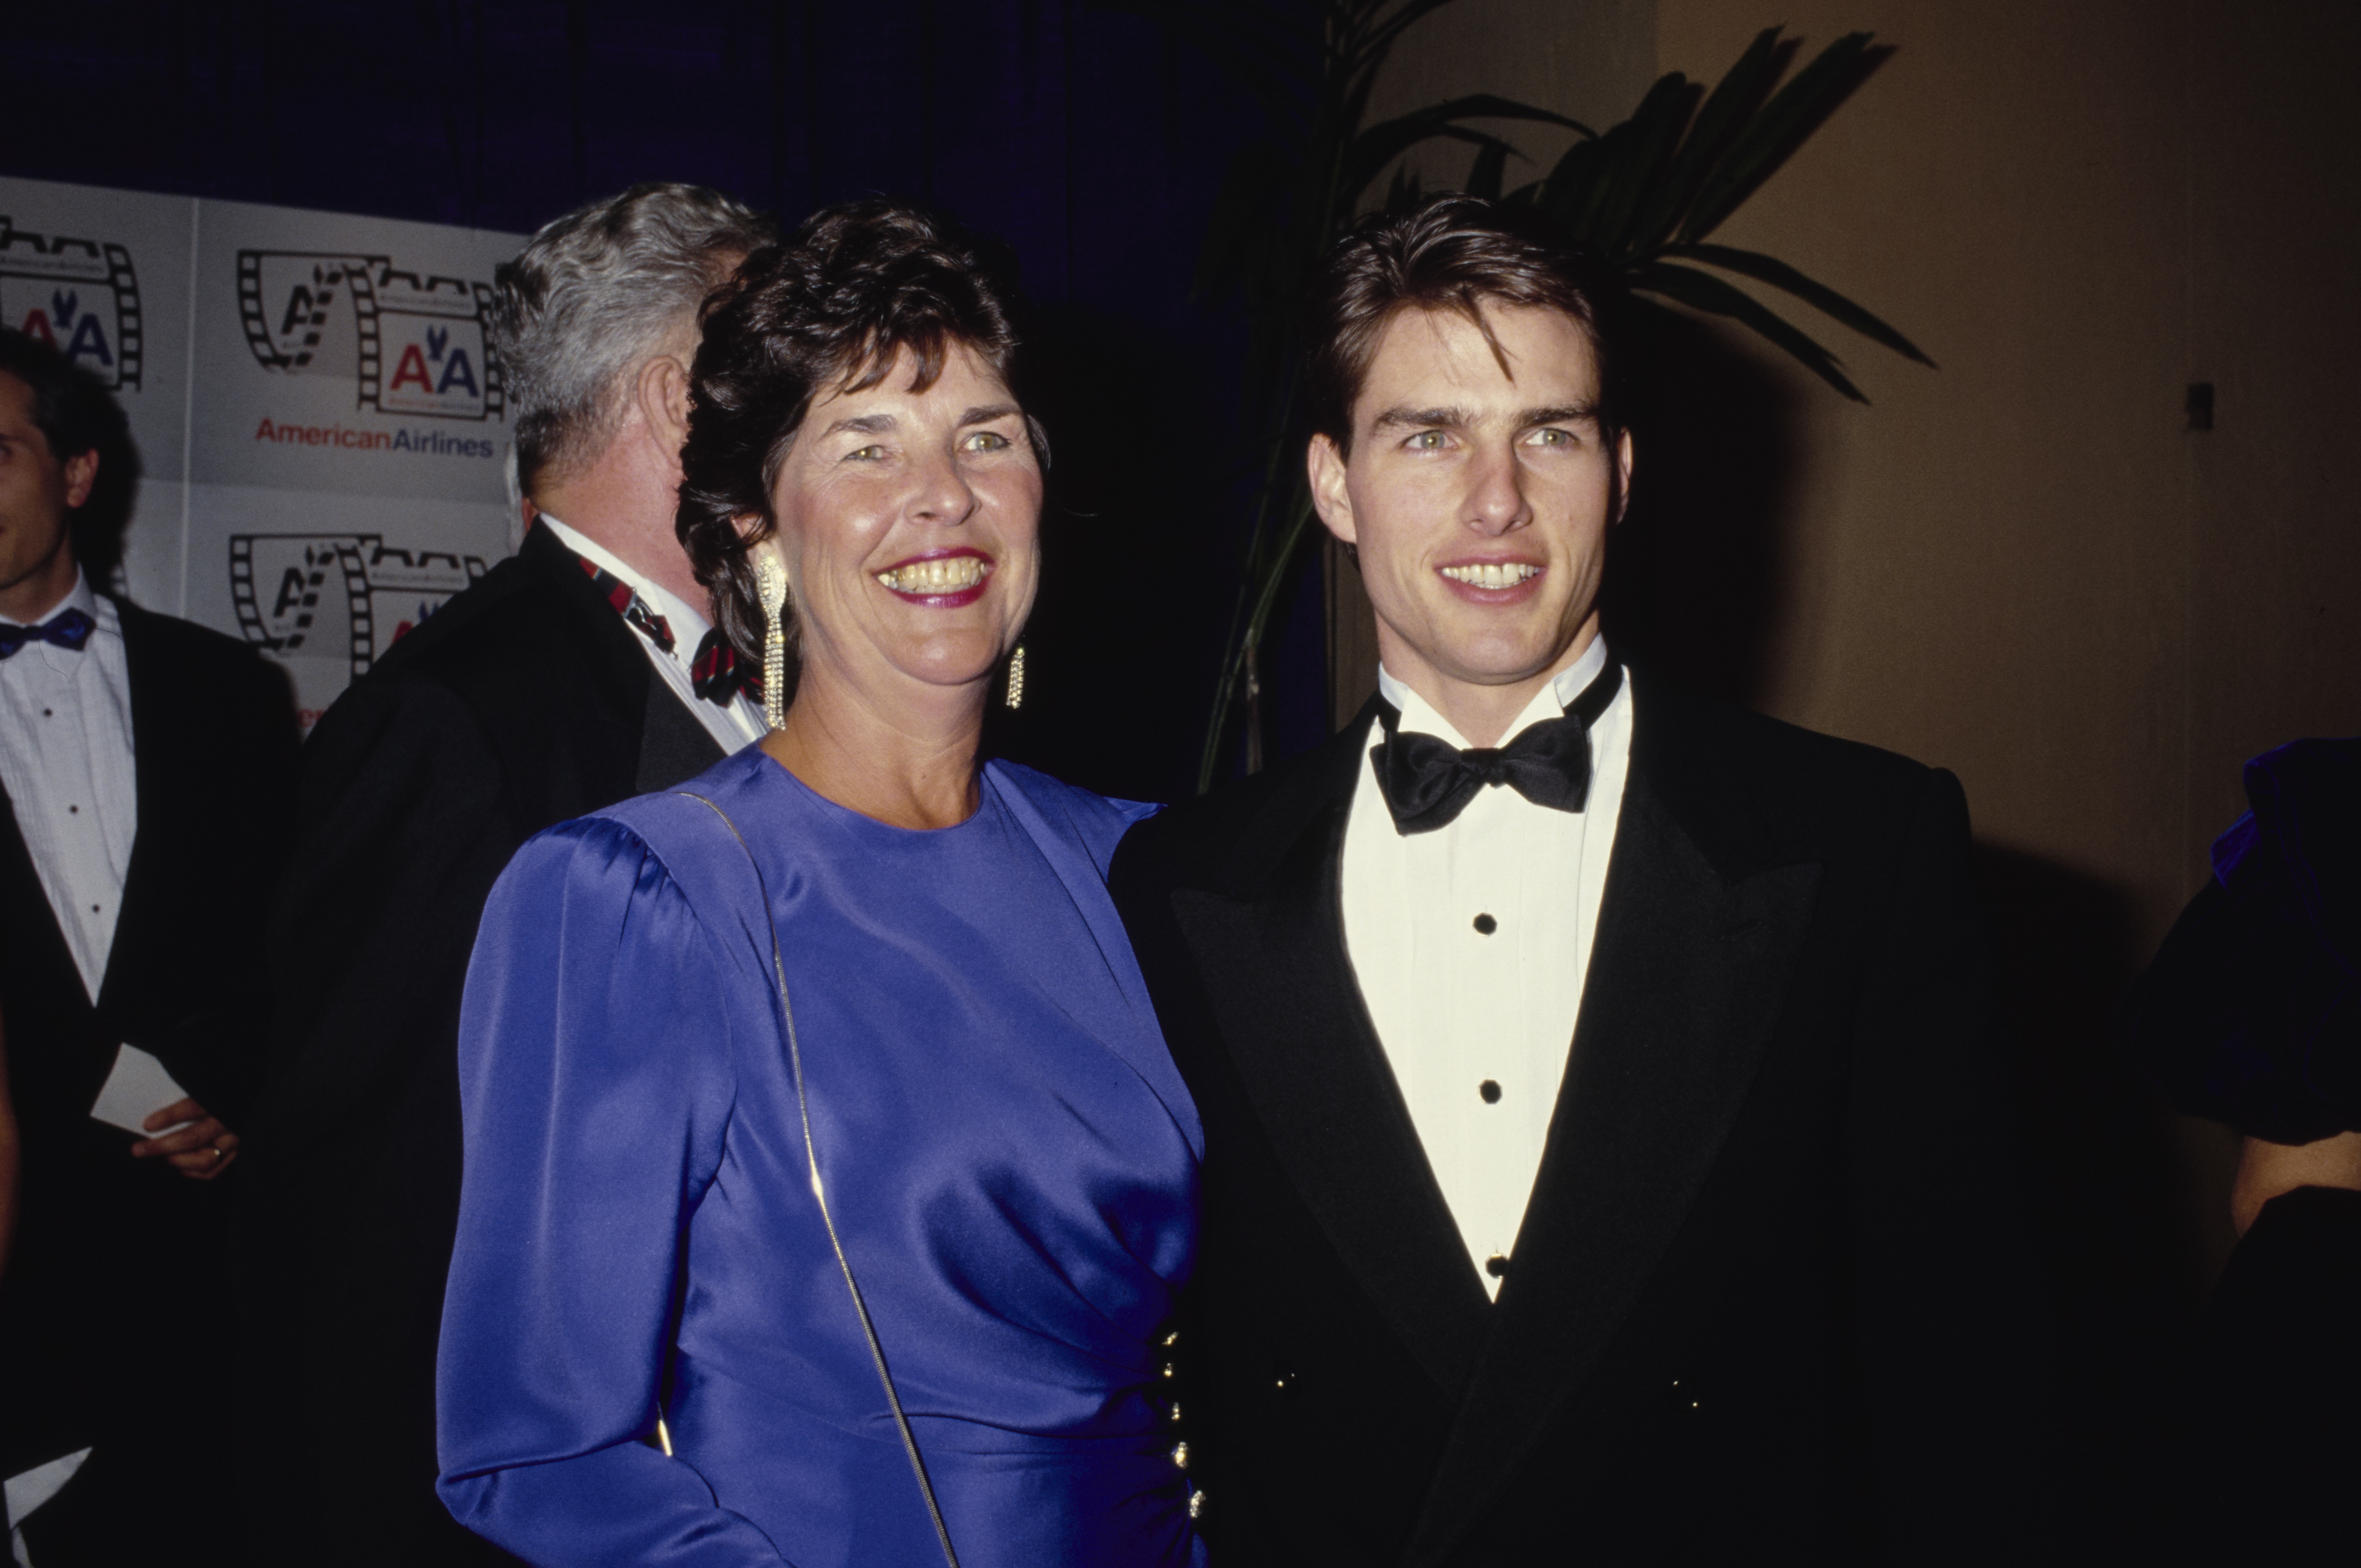 Mary Lee Pfeiffer und Tom Cruise bei den 8th Annual American Cinema Awards in Beverly Hills, 1991 | Quelle: Getty Images